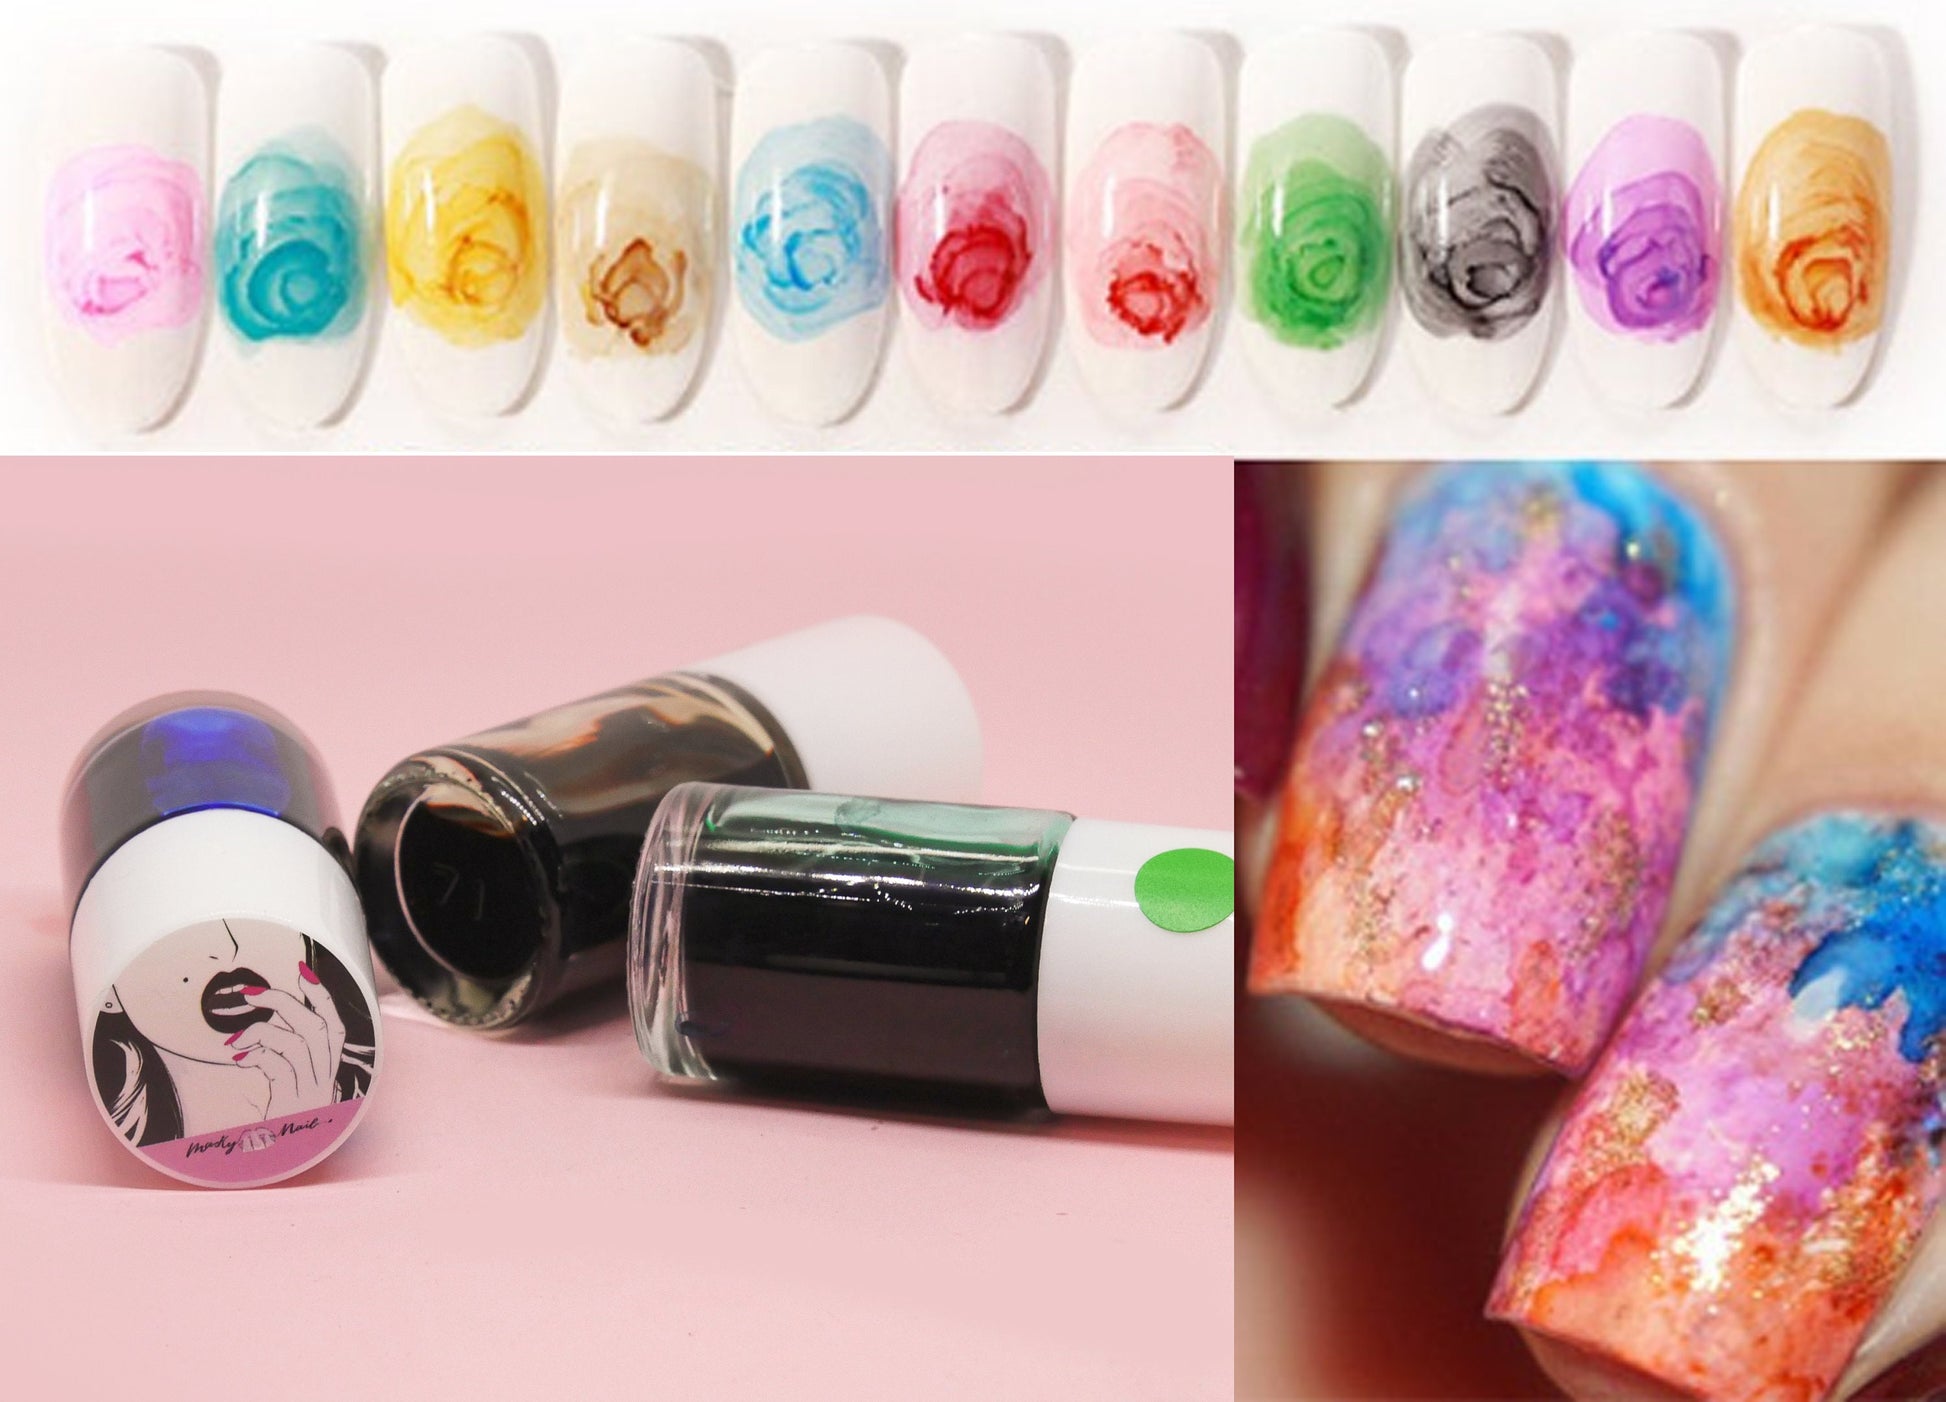 14ml Nail dye ink/ fast dry blossom polish/ gradient nail / Blooming floral paint ink/diluent artistic nail art ink for nail polish and gel